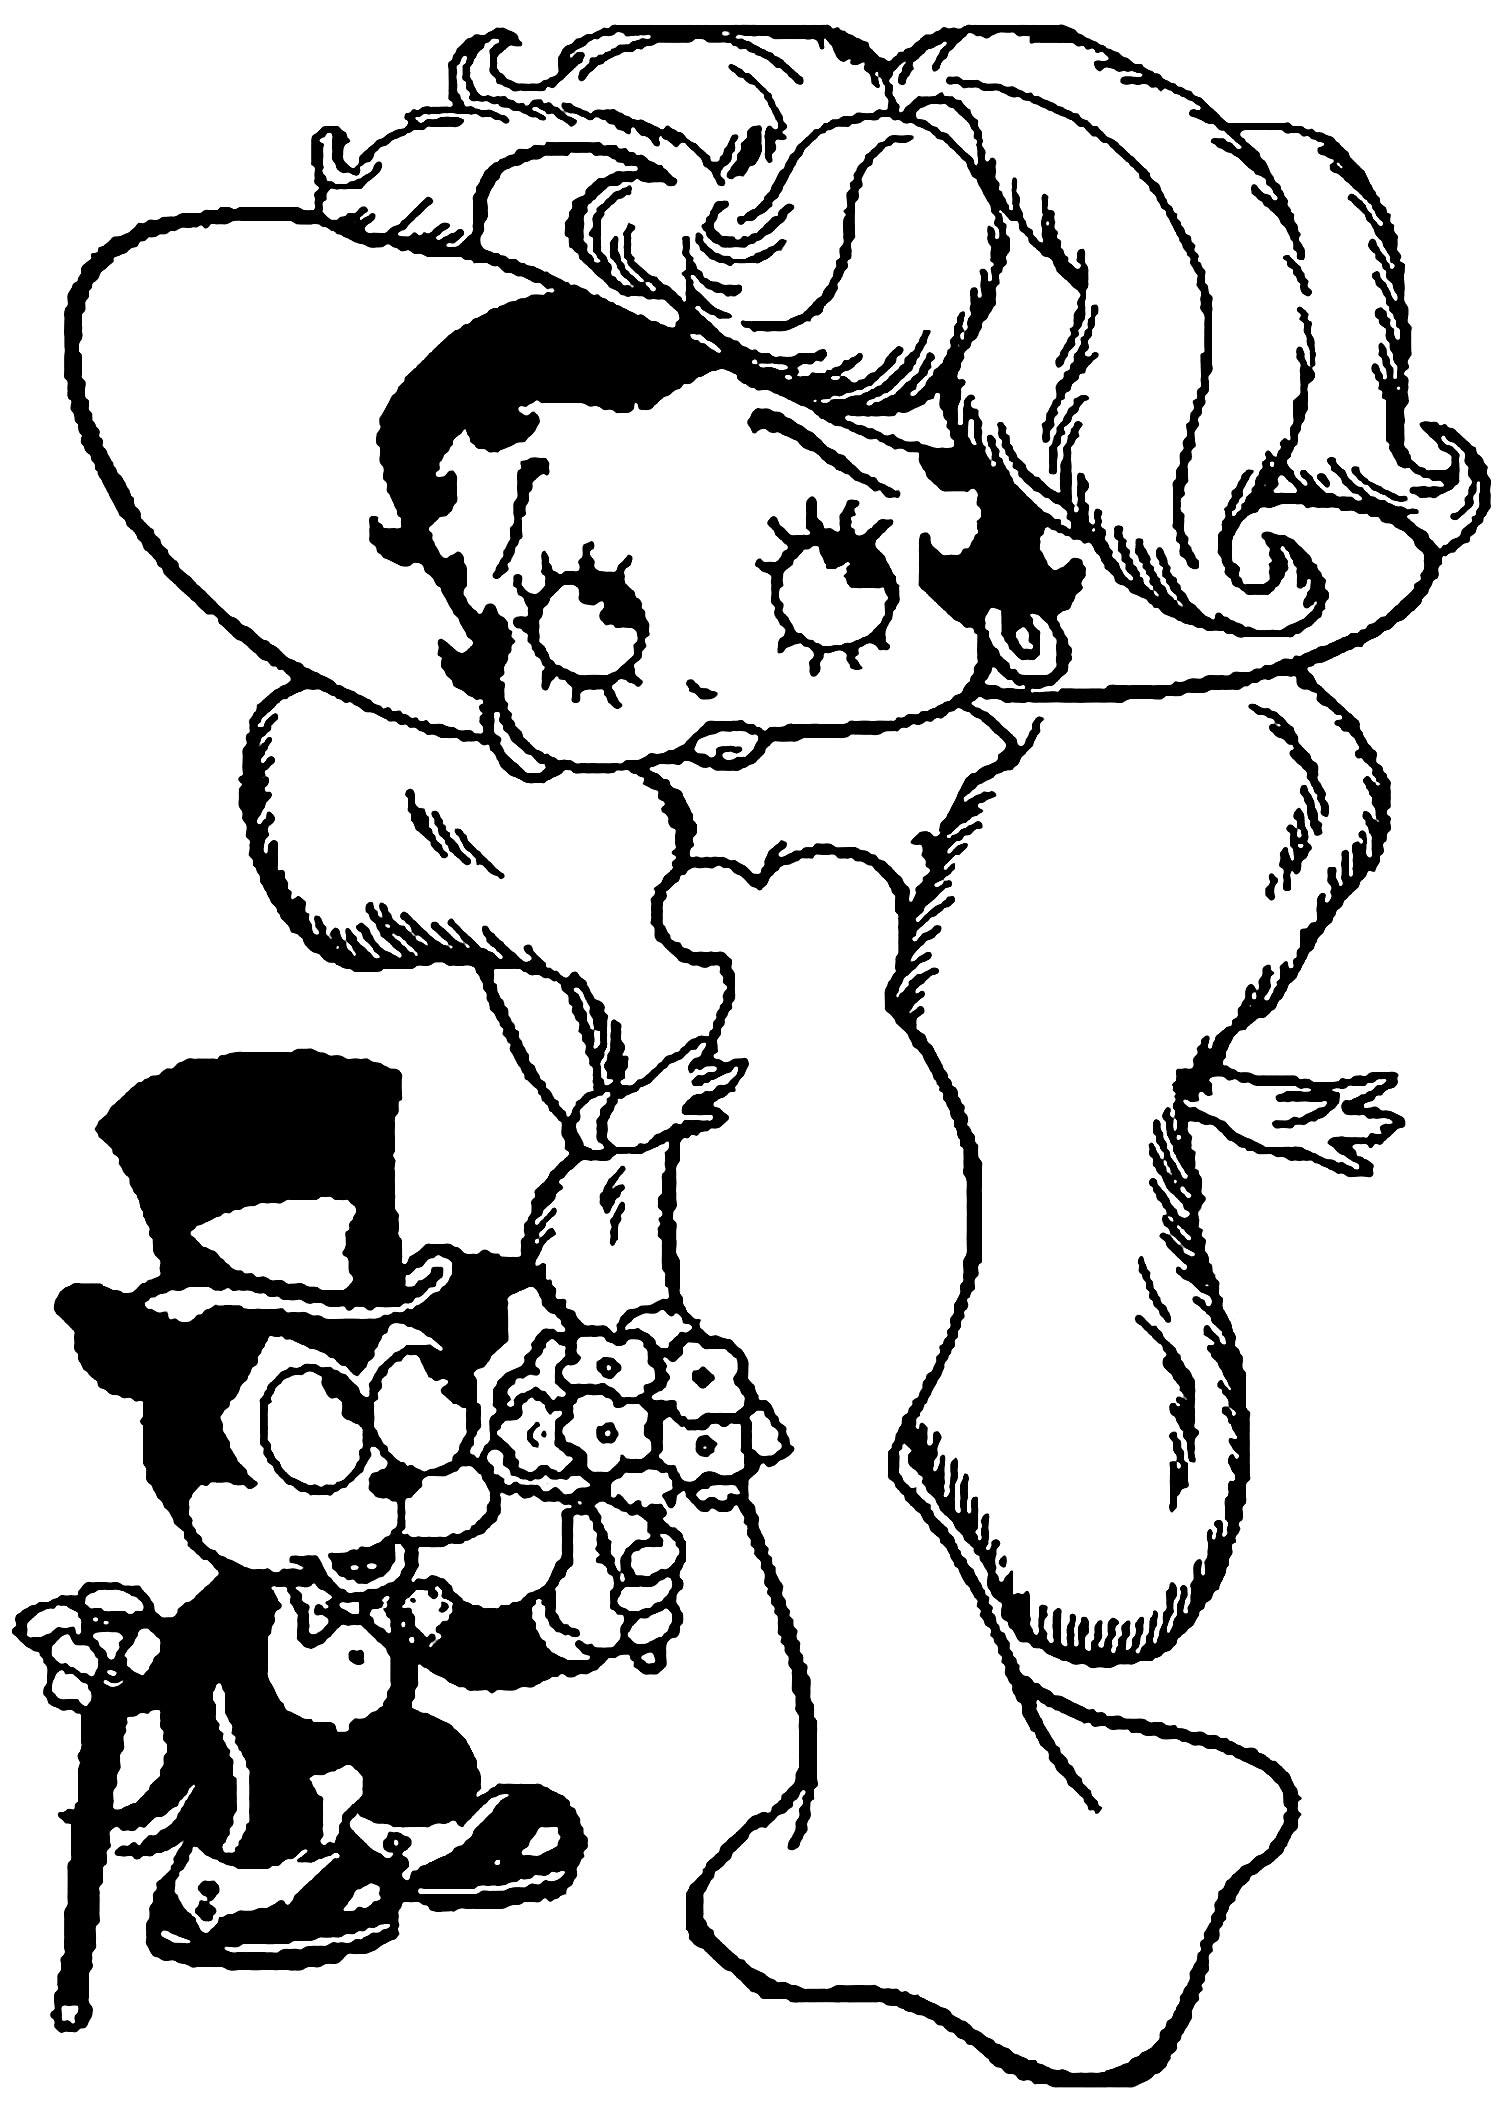 Betty boop coloring pages Luxury Baby Looney Bugs Bunny Coloring Pages